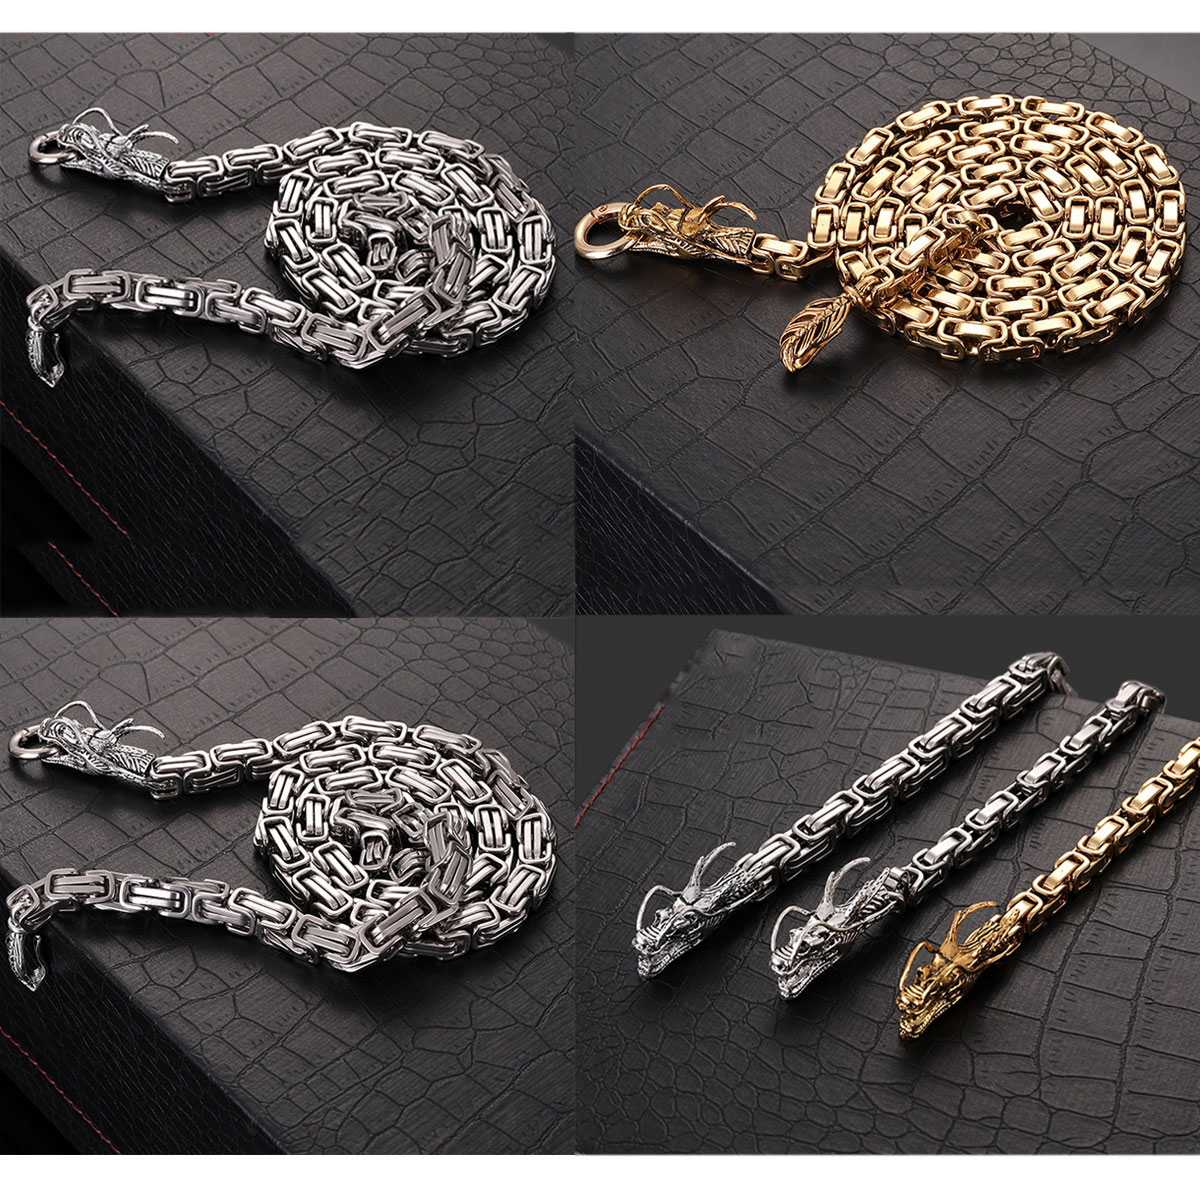 6-Type-Titanium-Steel-Keel-Self-protecion-Arms-Necklace-Tactical-Whip-Waist-Chain-1534787-1